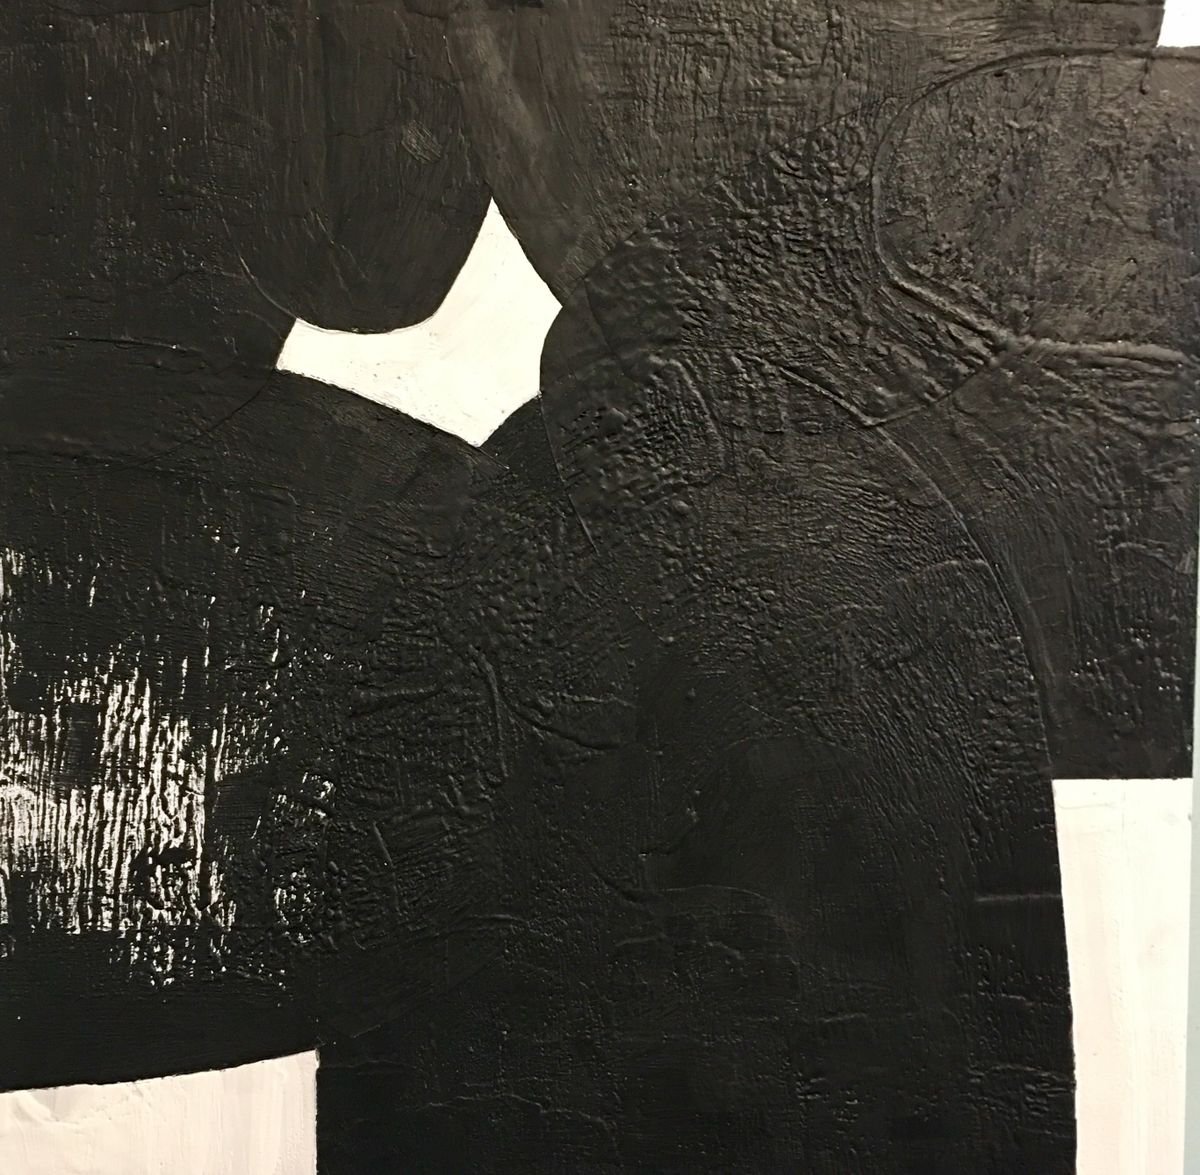 Songs Series Encaustic Paintings, Black and White The Wild Kindness by Domenica Brockman